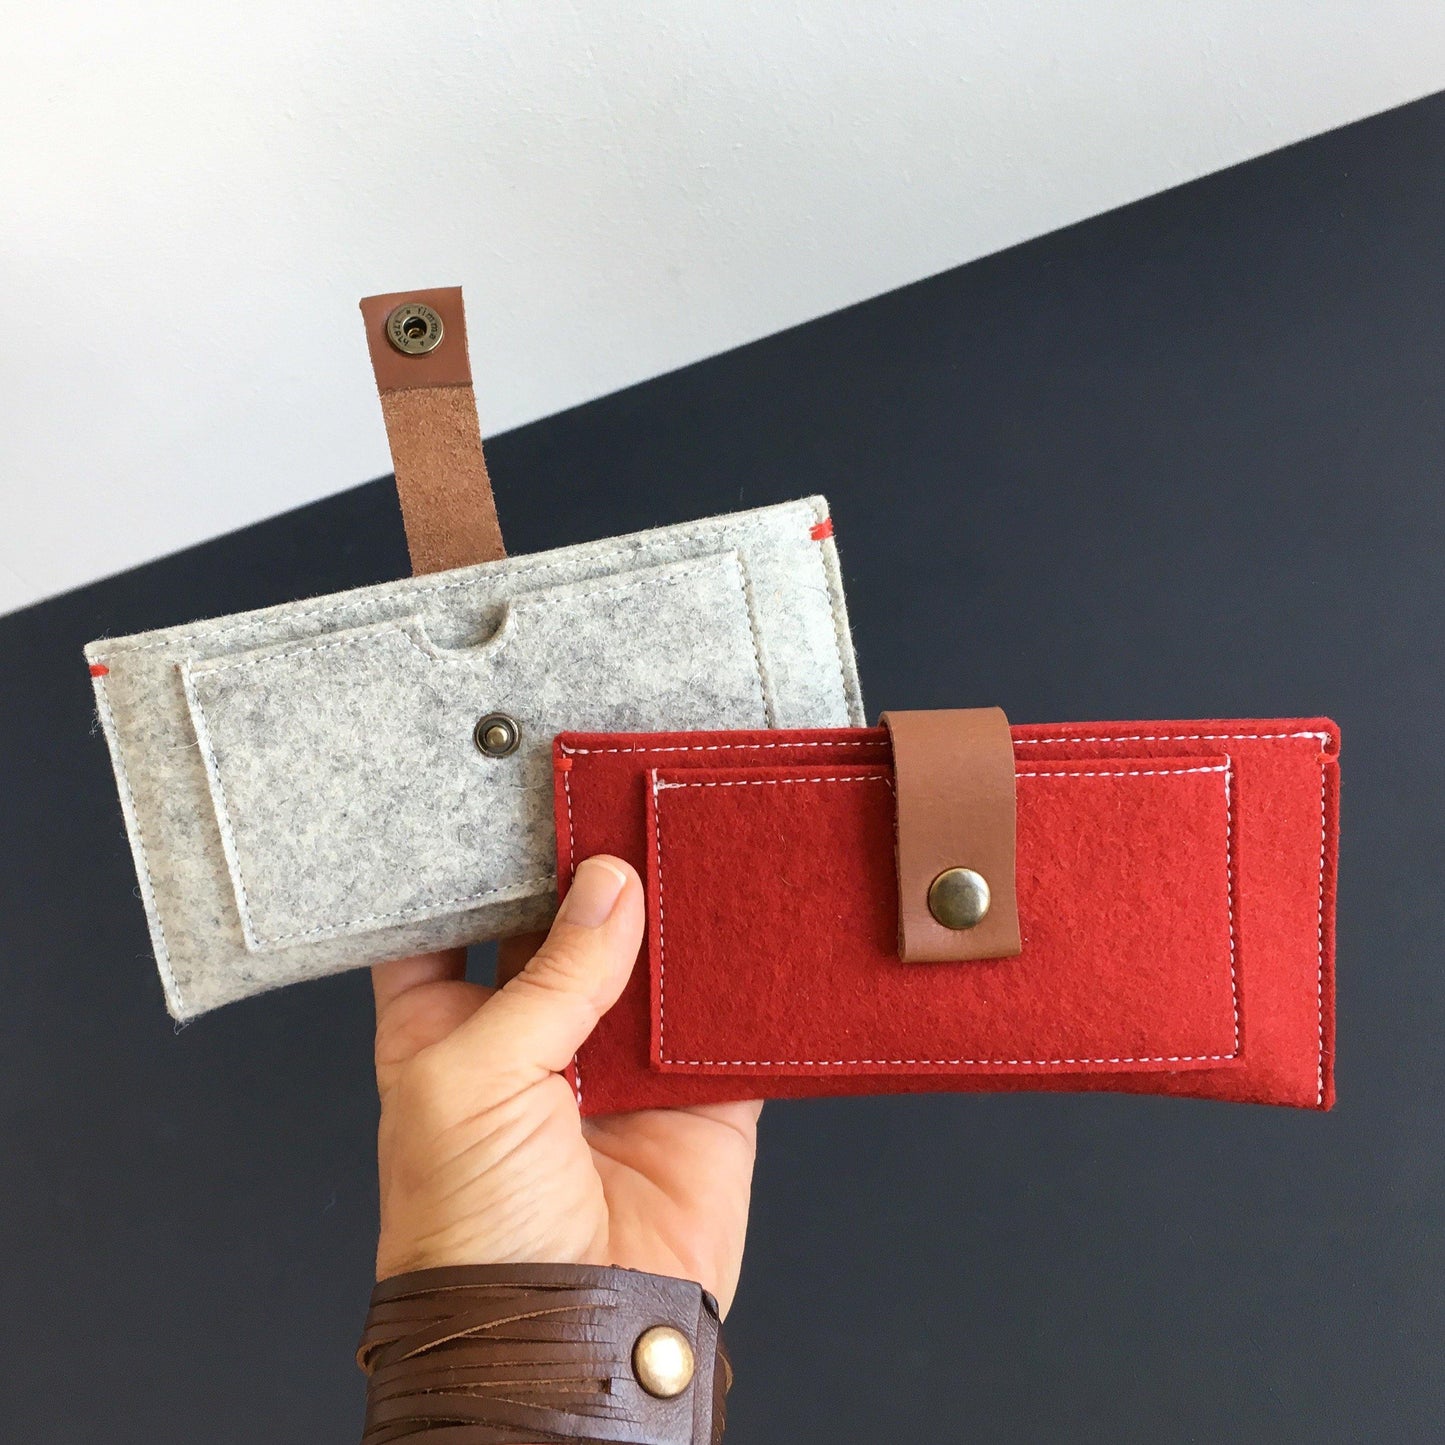 Iphone X wallet in grey and red